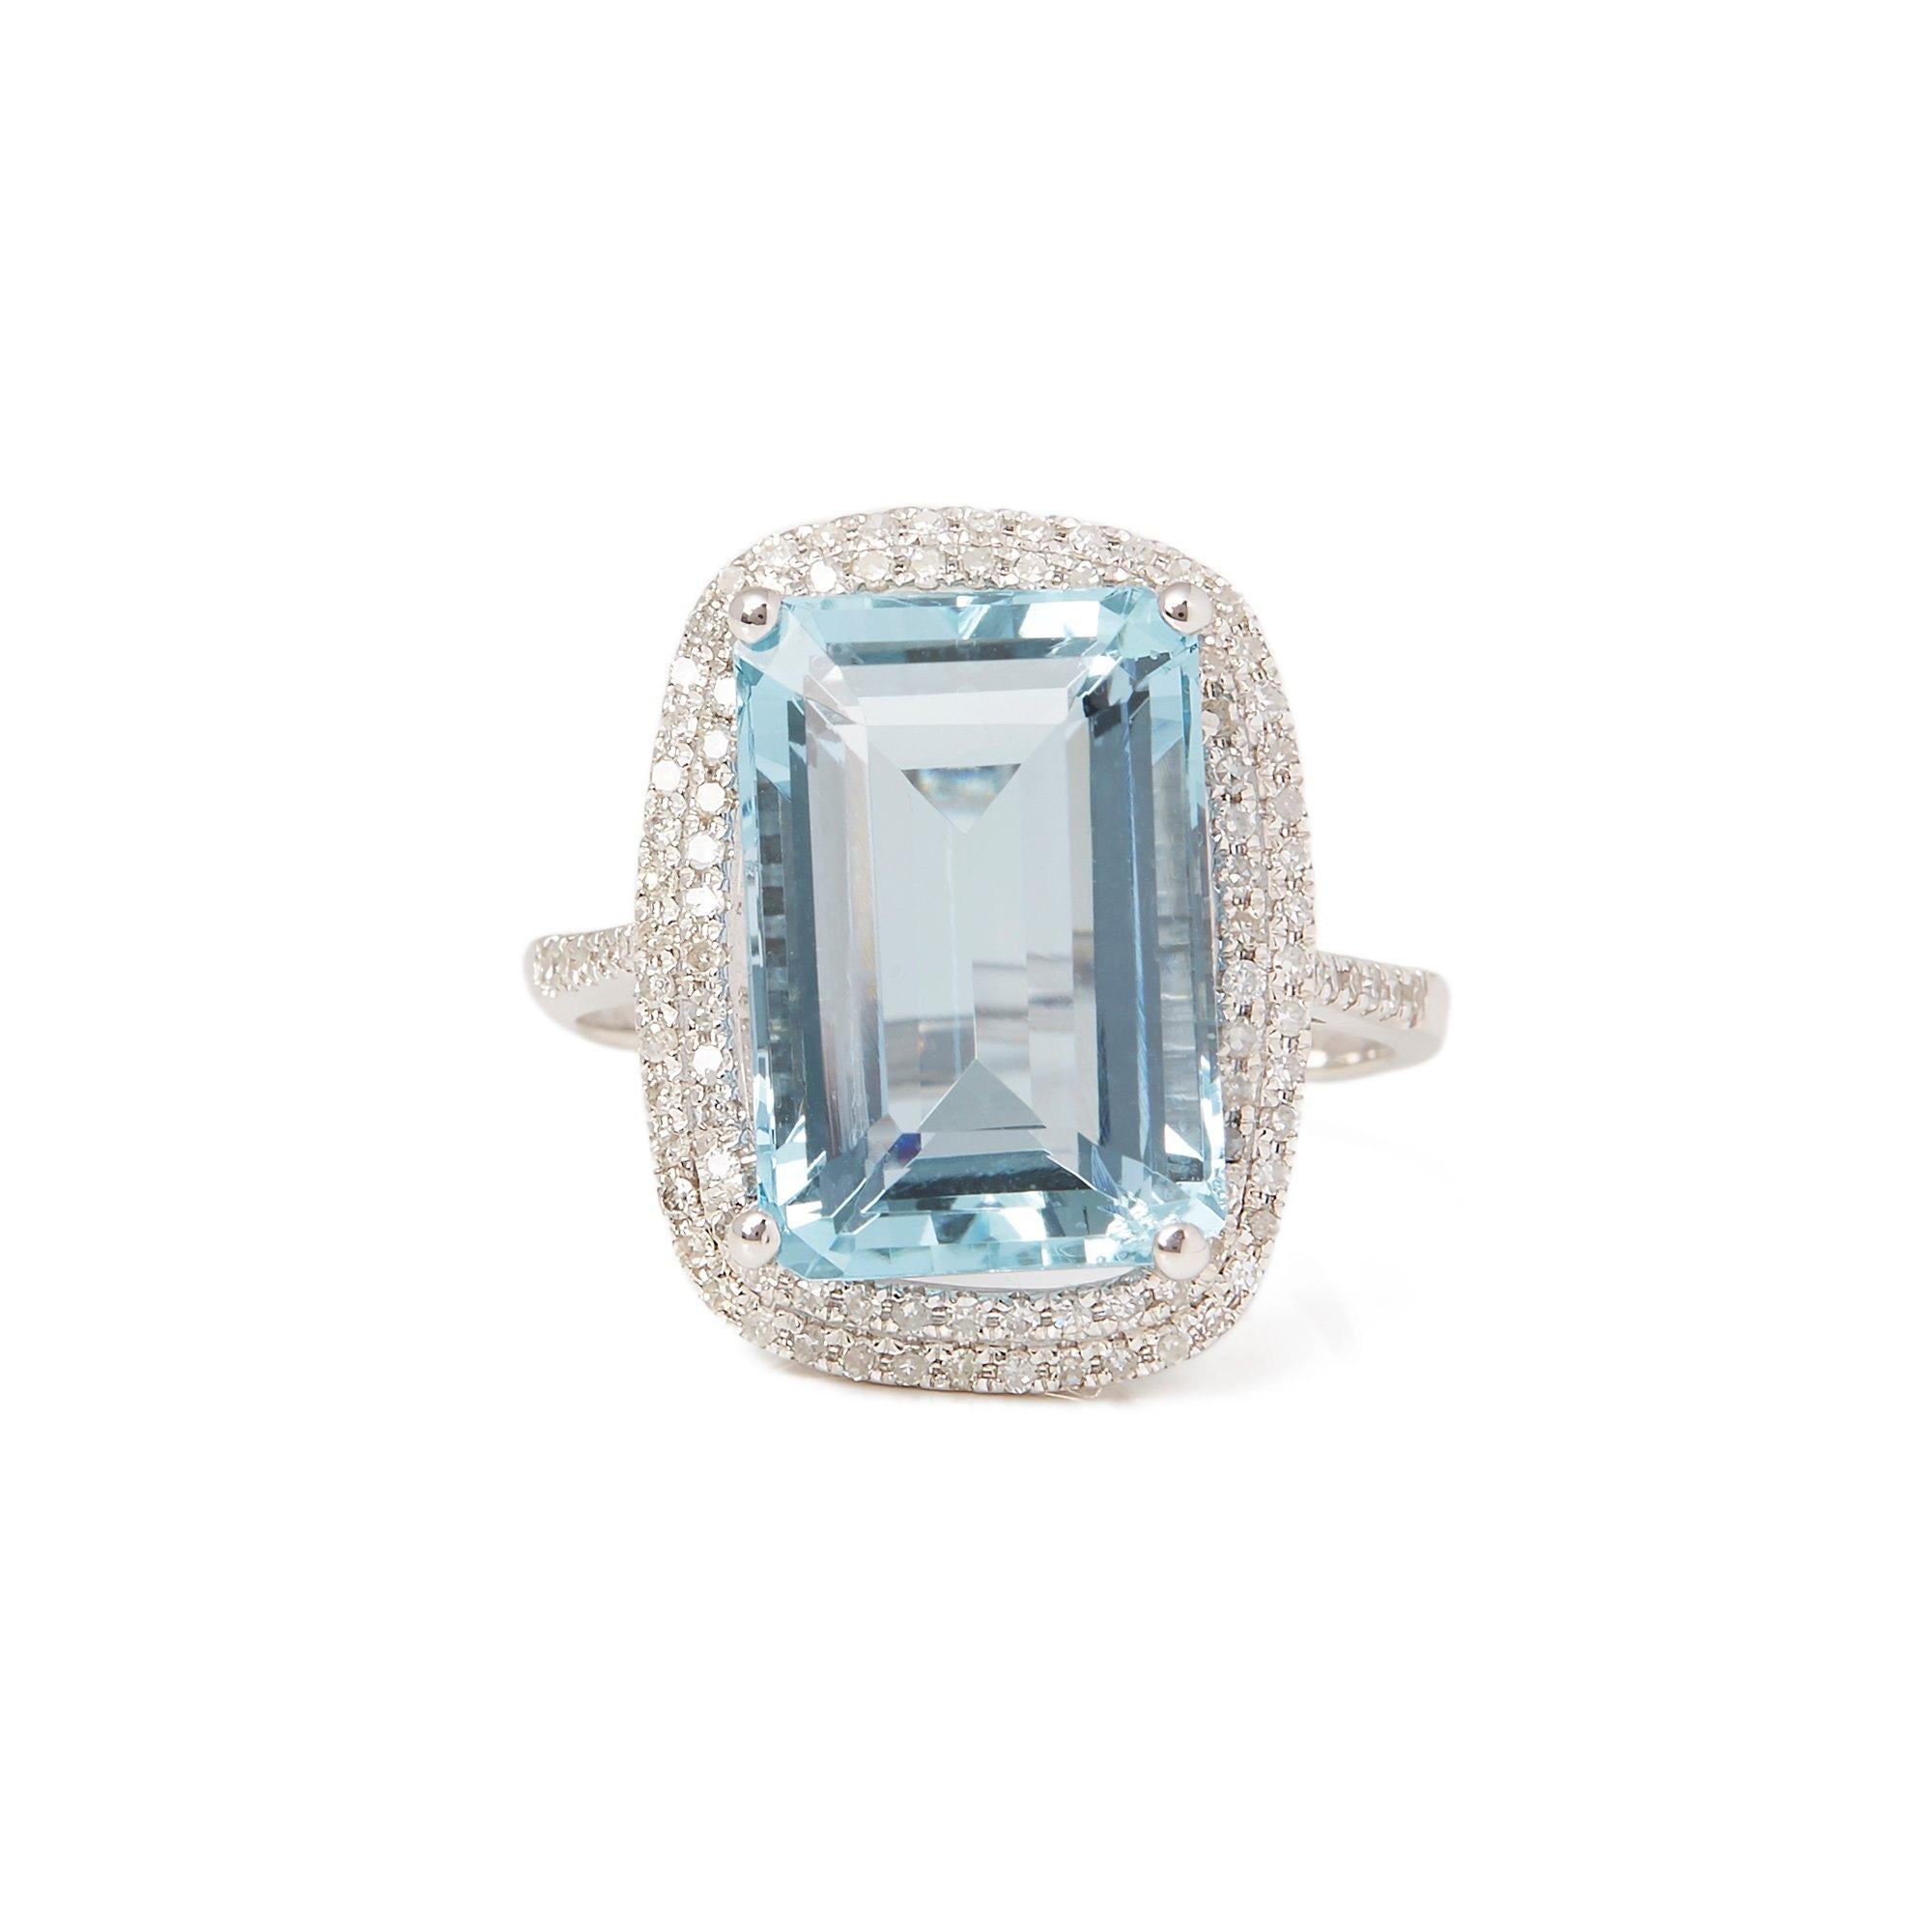 This ring designed by David Jerome is from his private collection and features one Emerald cut Aquamarine totalling 7.92cts sourced in Brazil. Set with round Brilliant cut Diamonds totalling 0.44cts mounted in an 18k white gold setting. Finger size